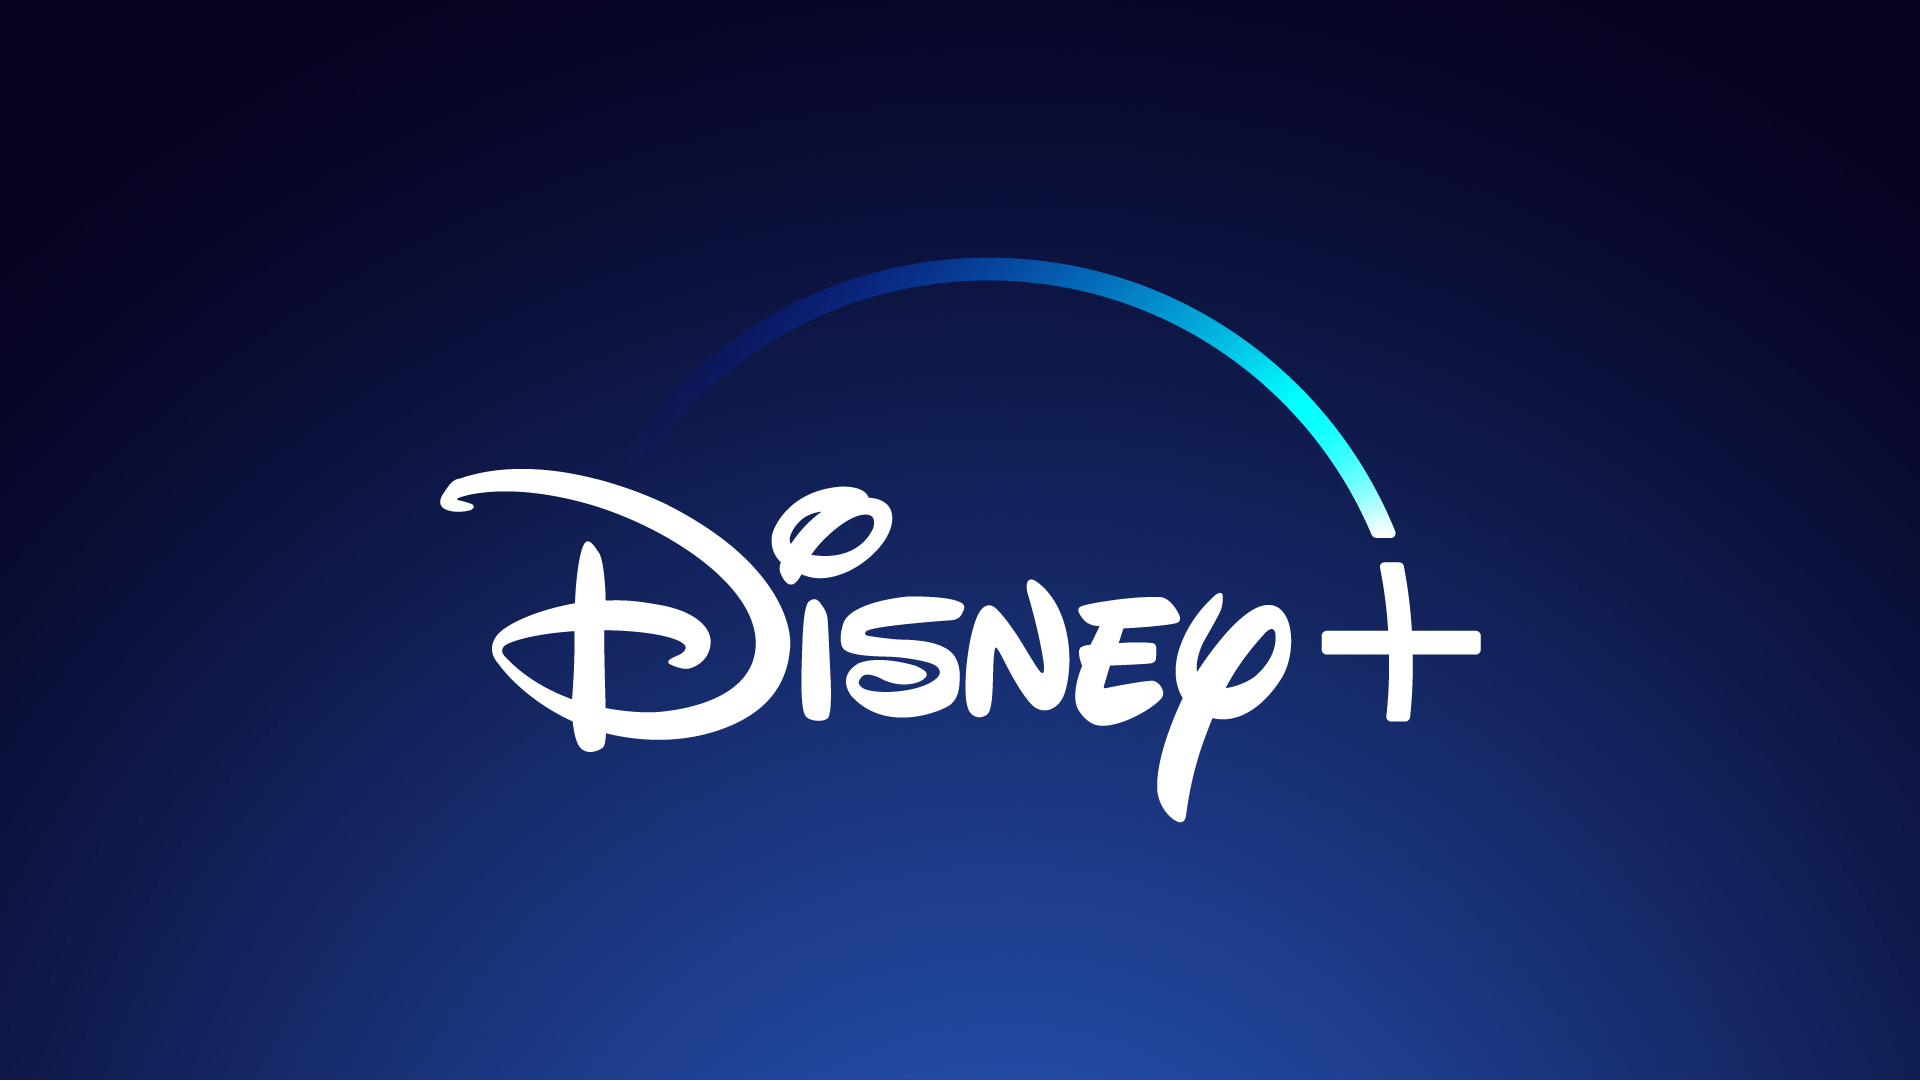 Disney+ Hotstar to Debut in India on April 3